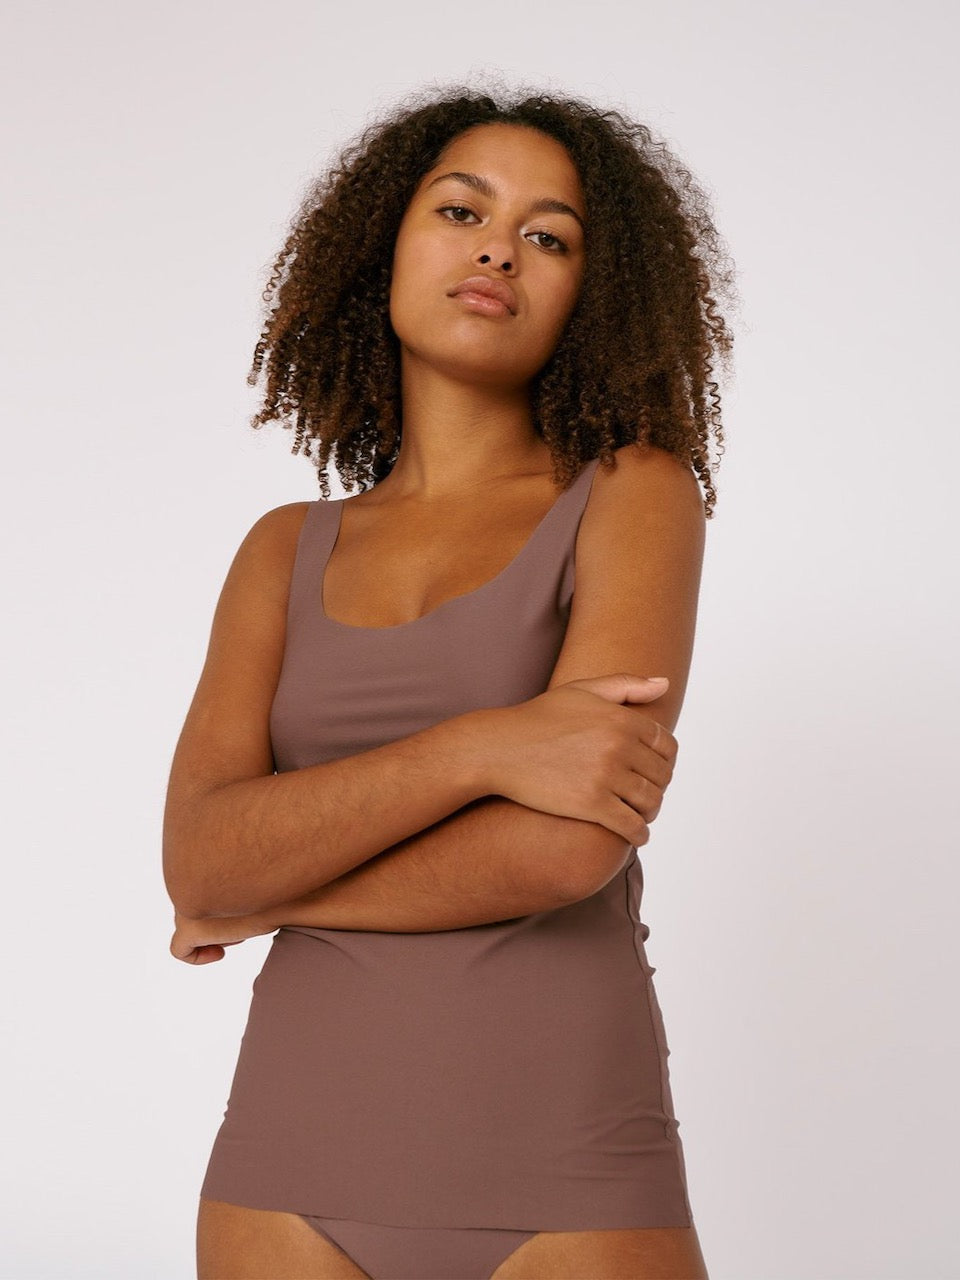 The model is wearing a Organic Basics Invisible Tank Top - Deep Taupe.